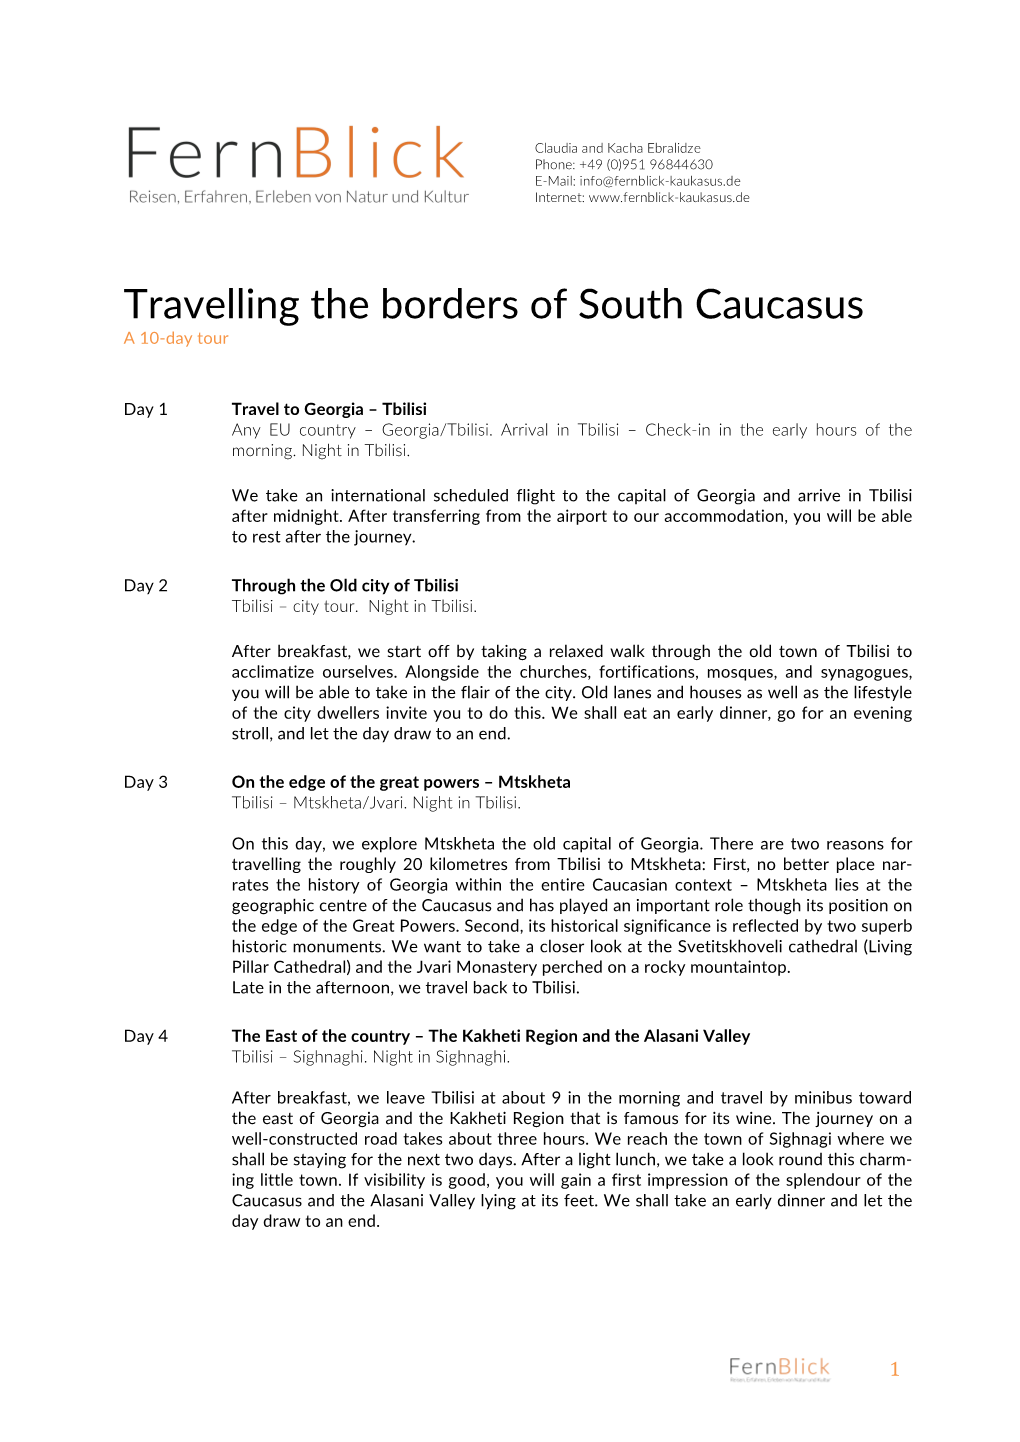 Travelling the Borders of South Caucasus a 10-Day Tour